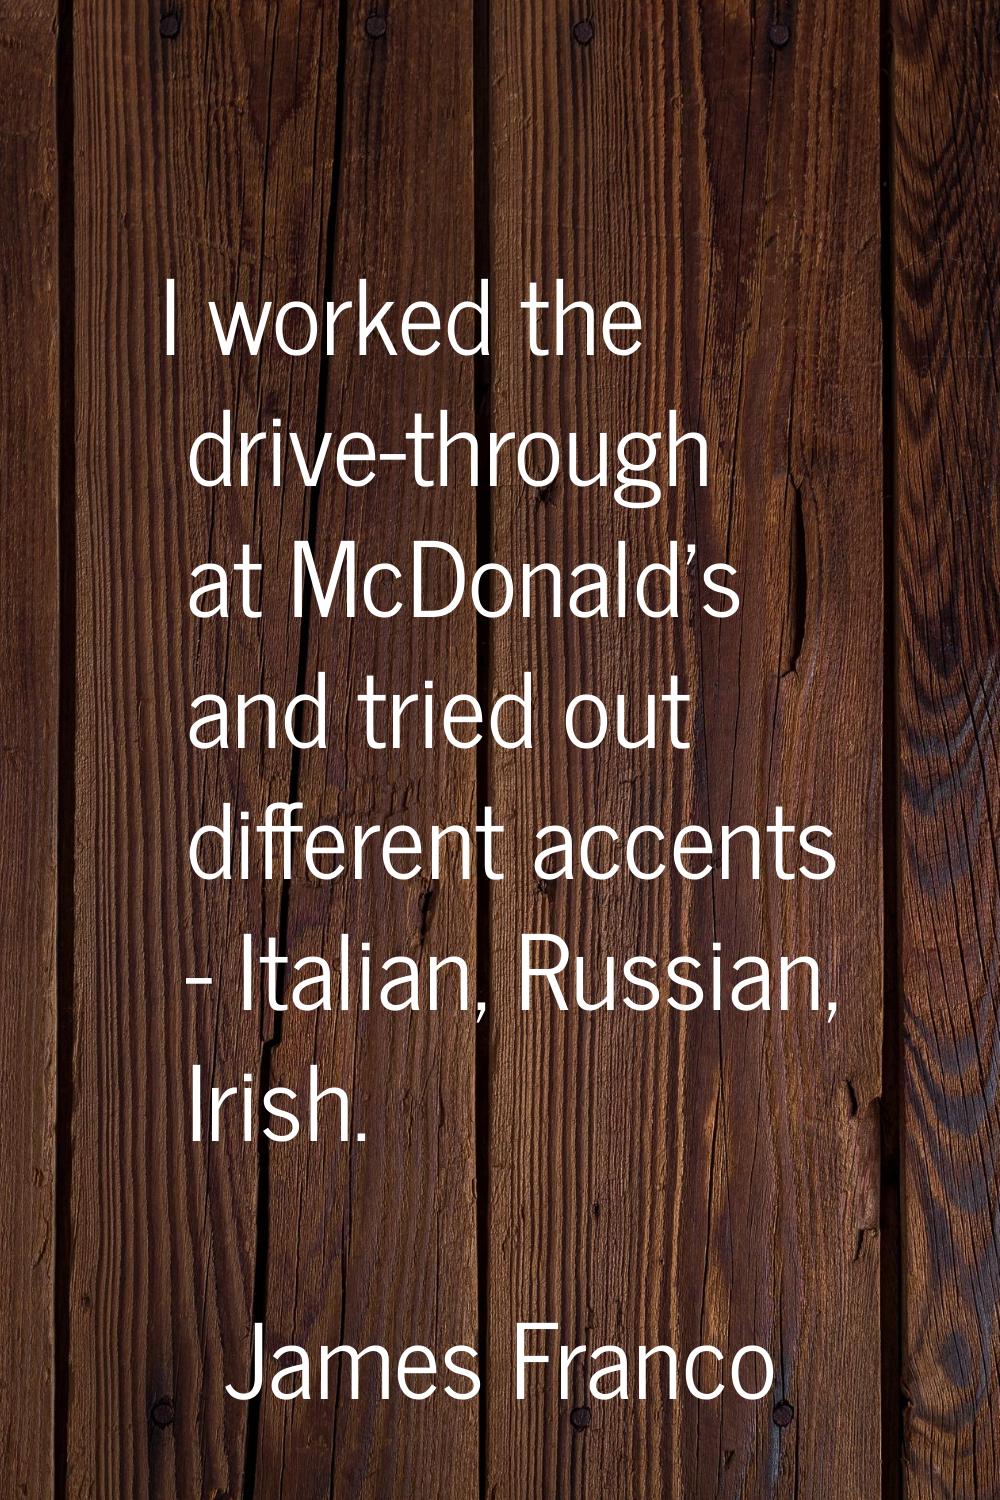 I worked the drive-through at McDonald's and tried out different accents - Italian, Russian, Irish.